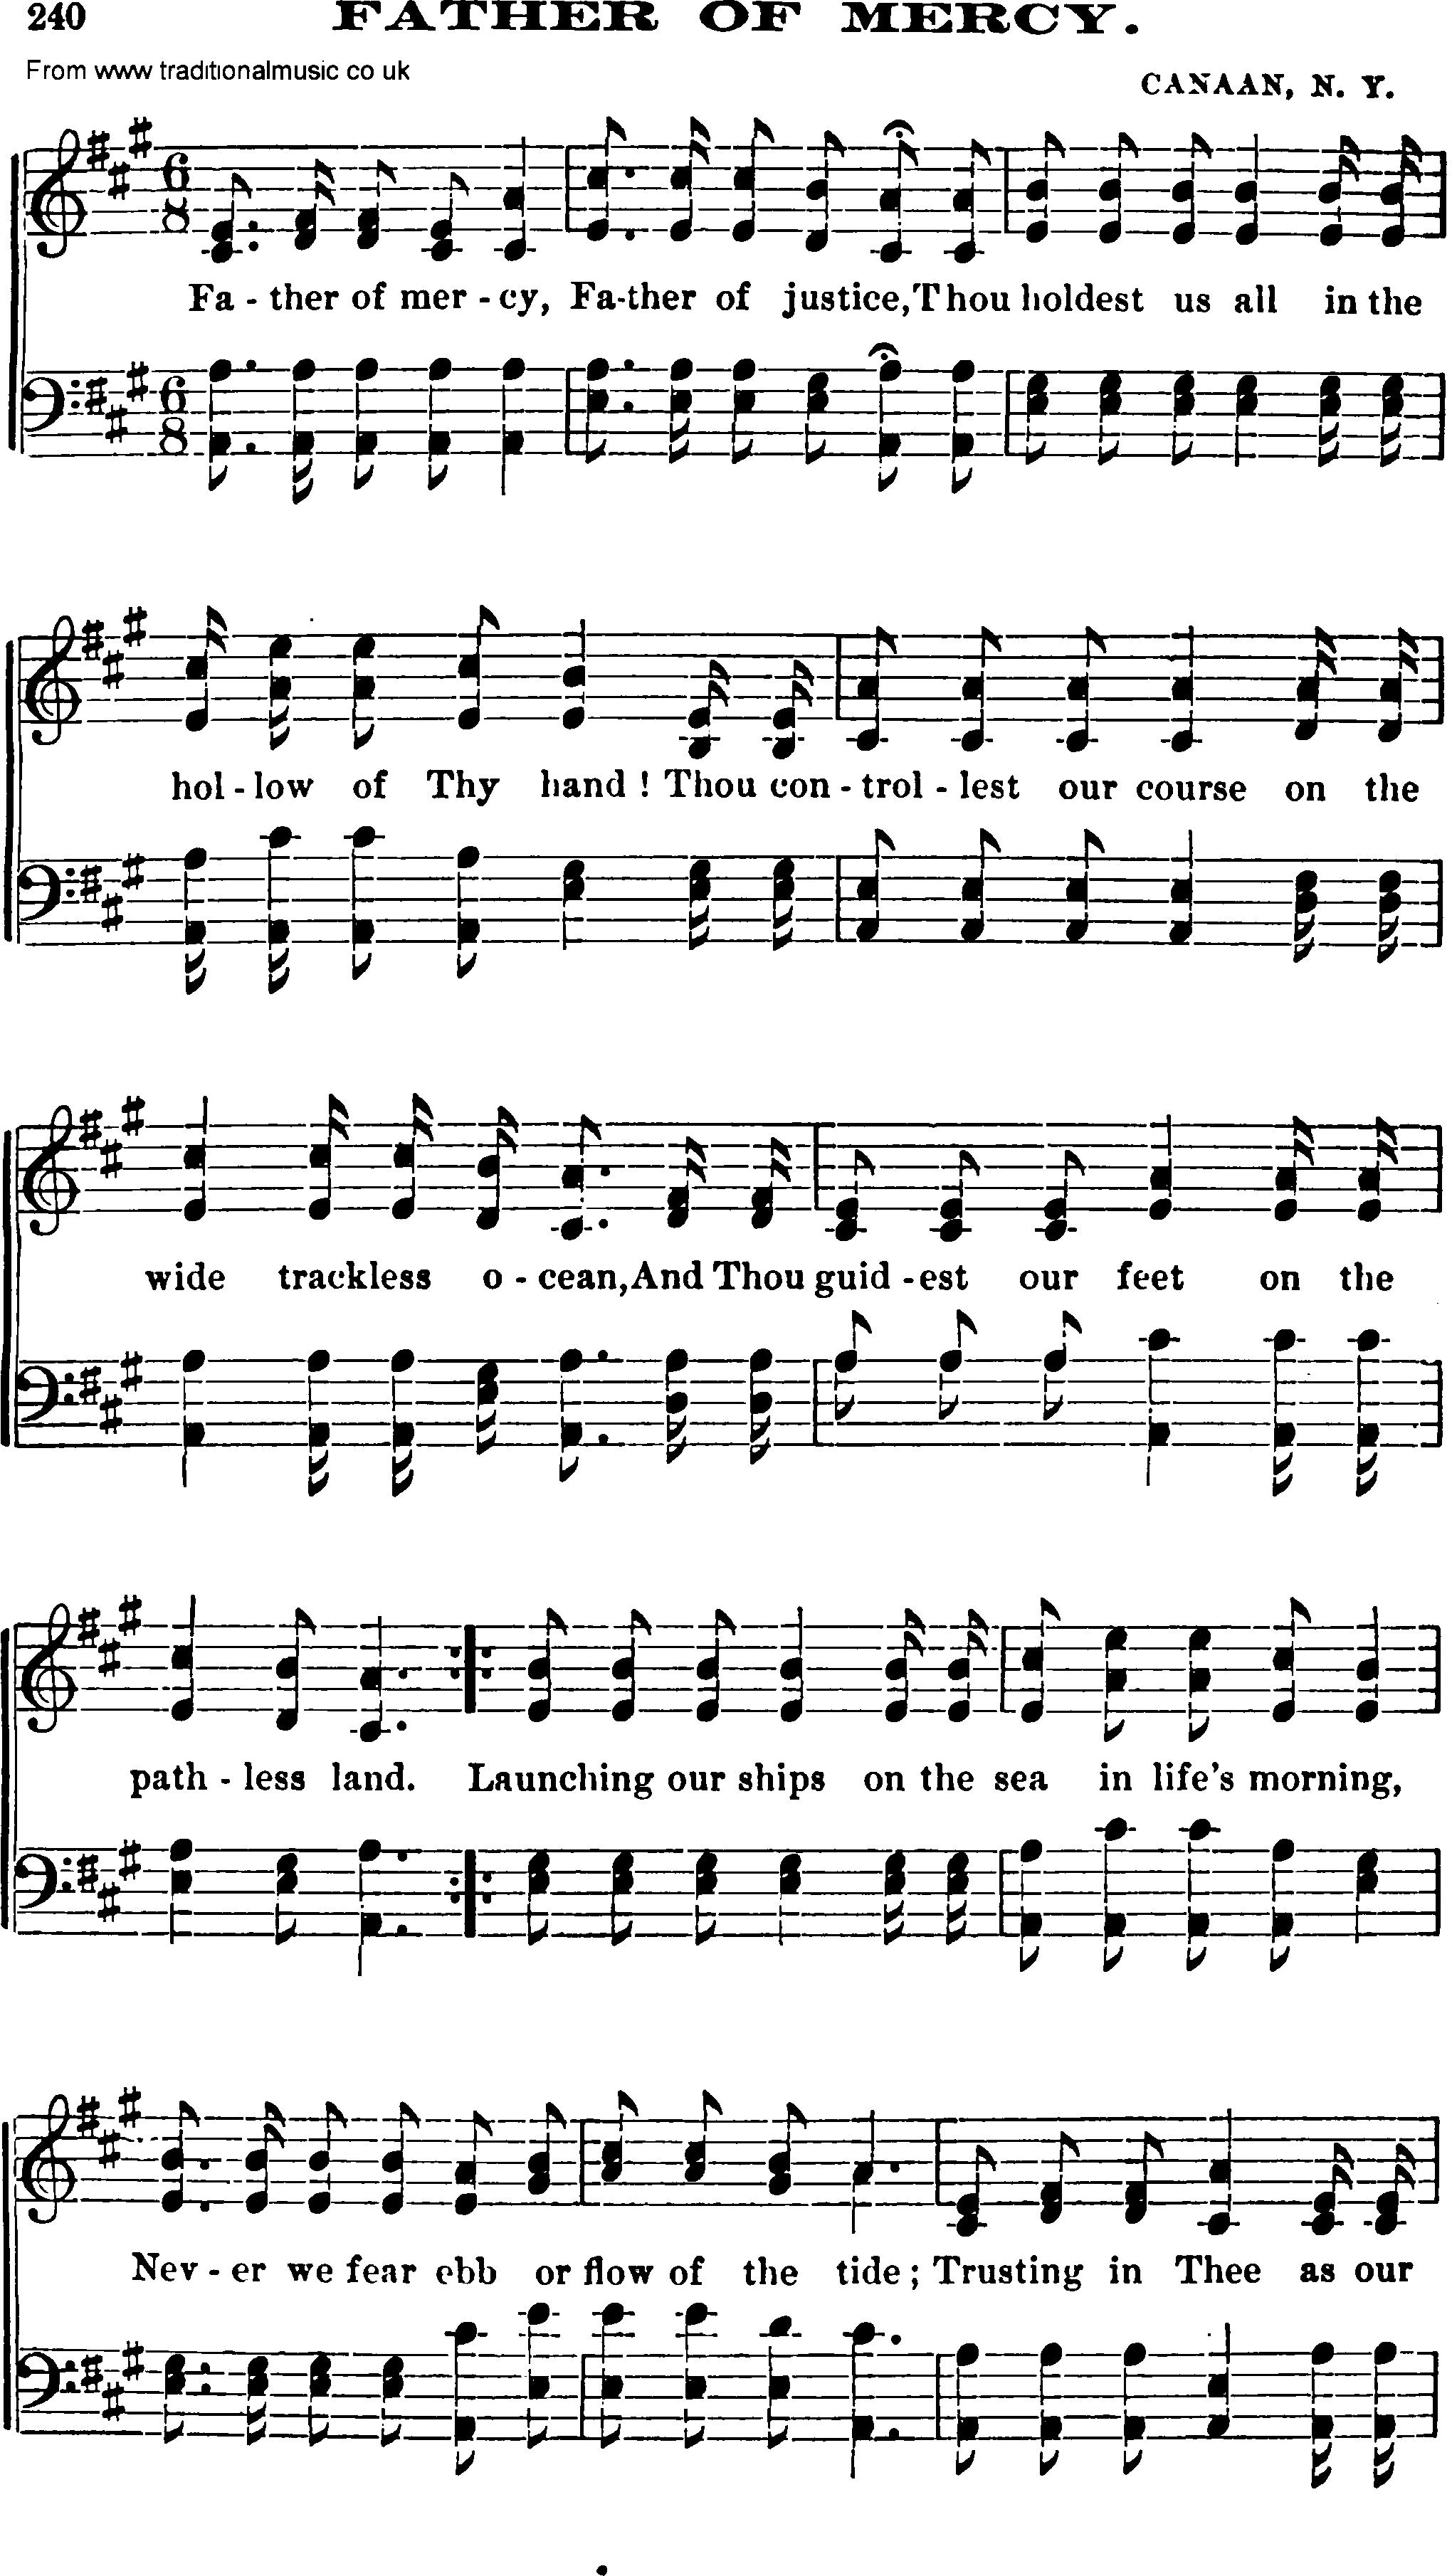 Shaker Music collection, Hymn: Father Of Mercy, sheetmusic and PDF